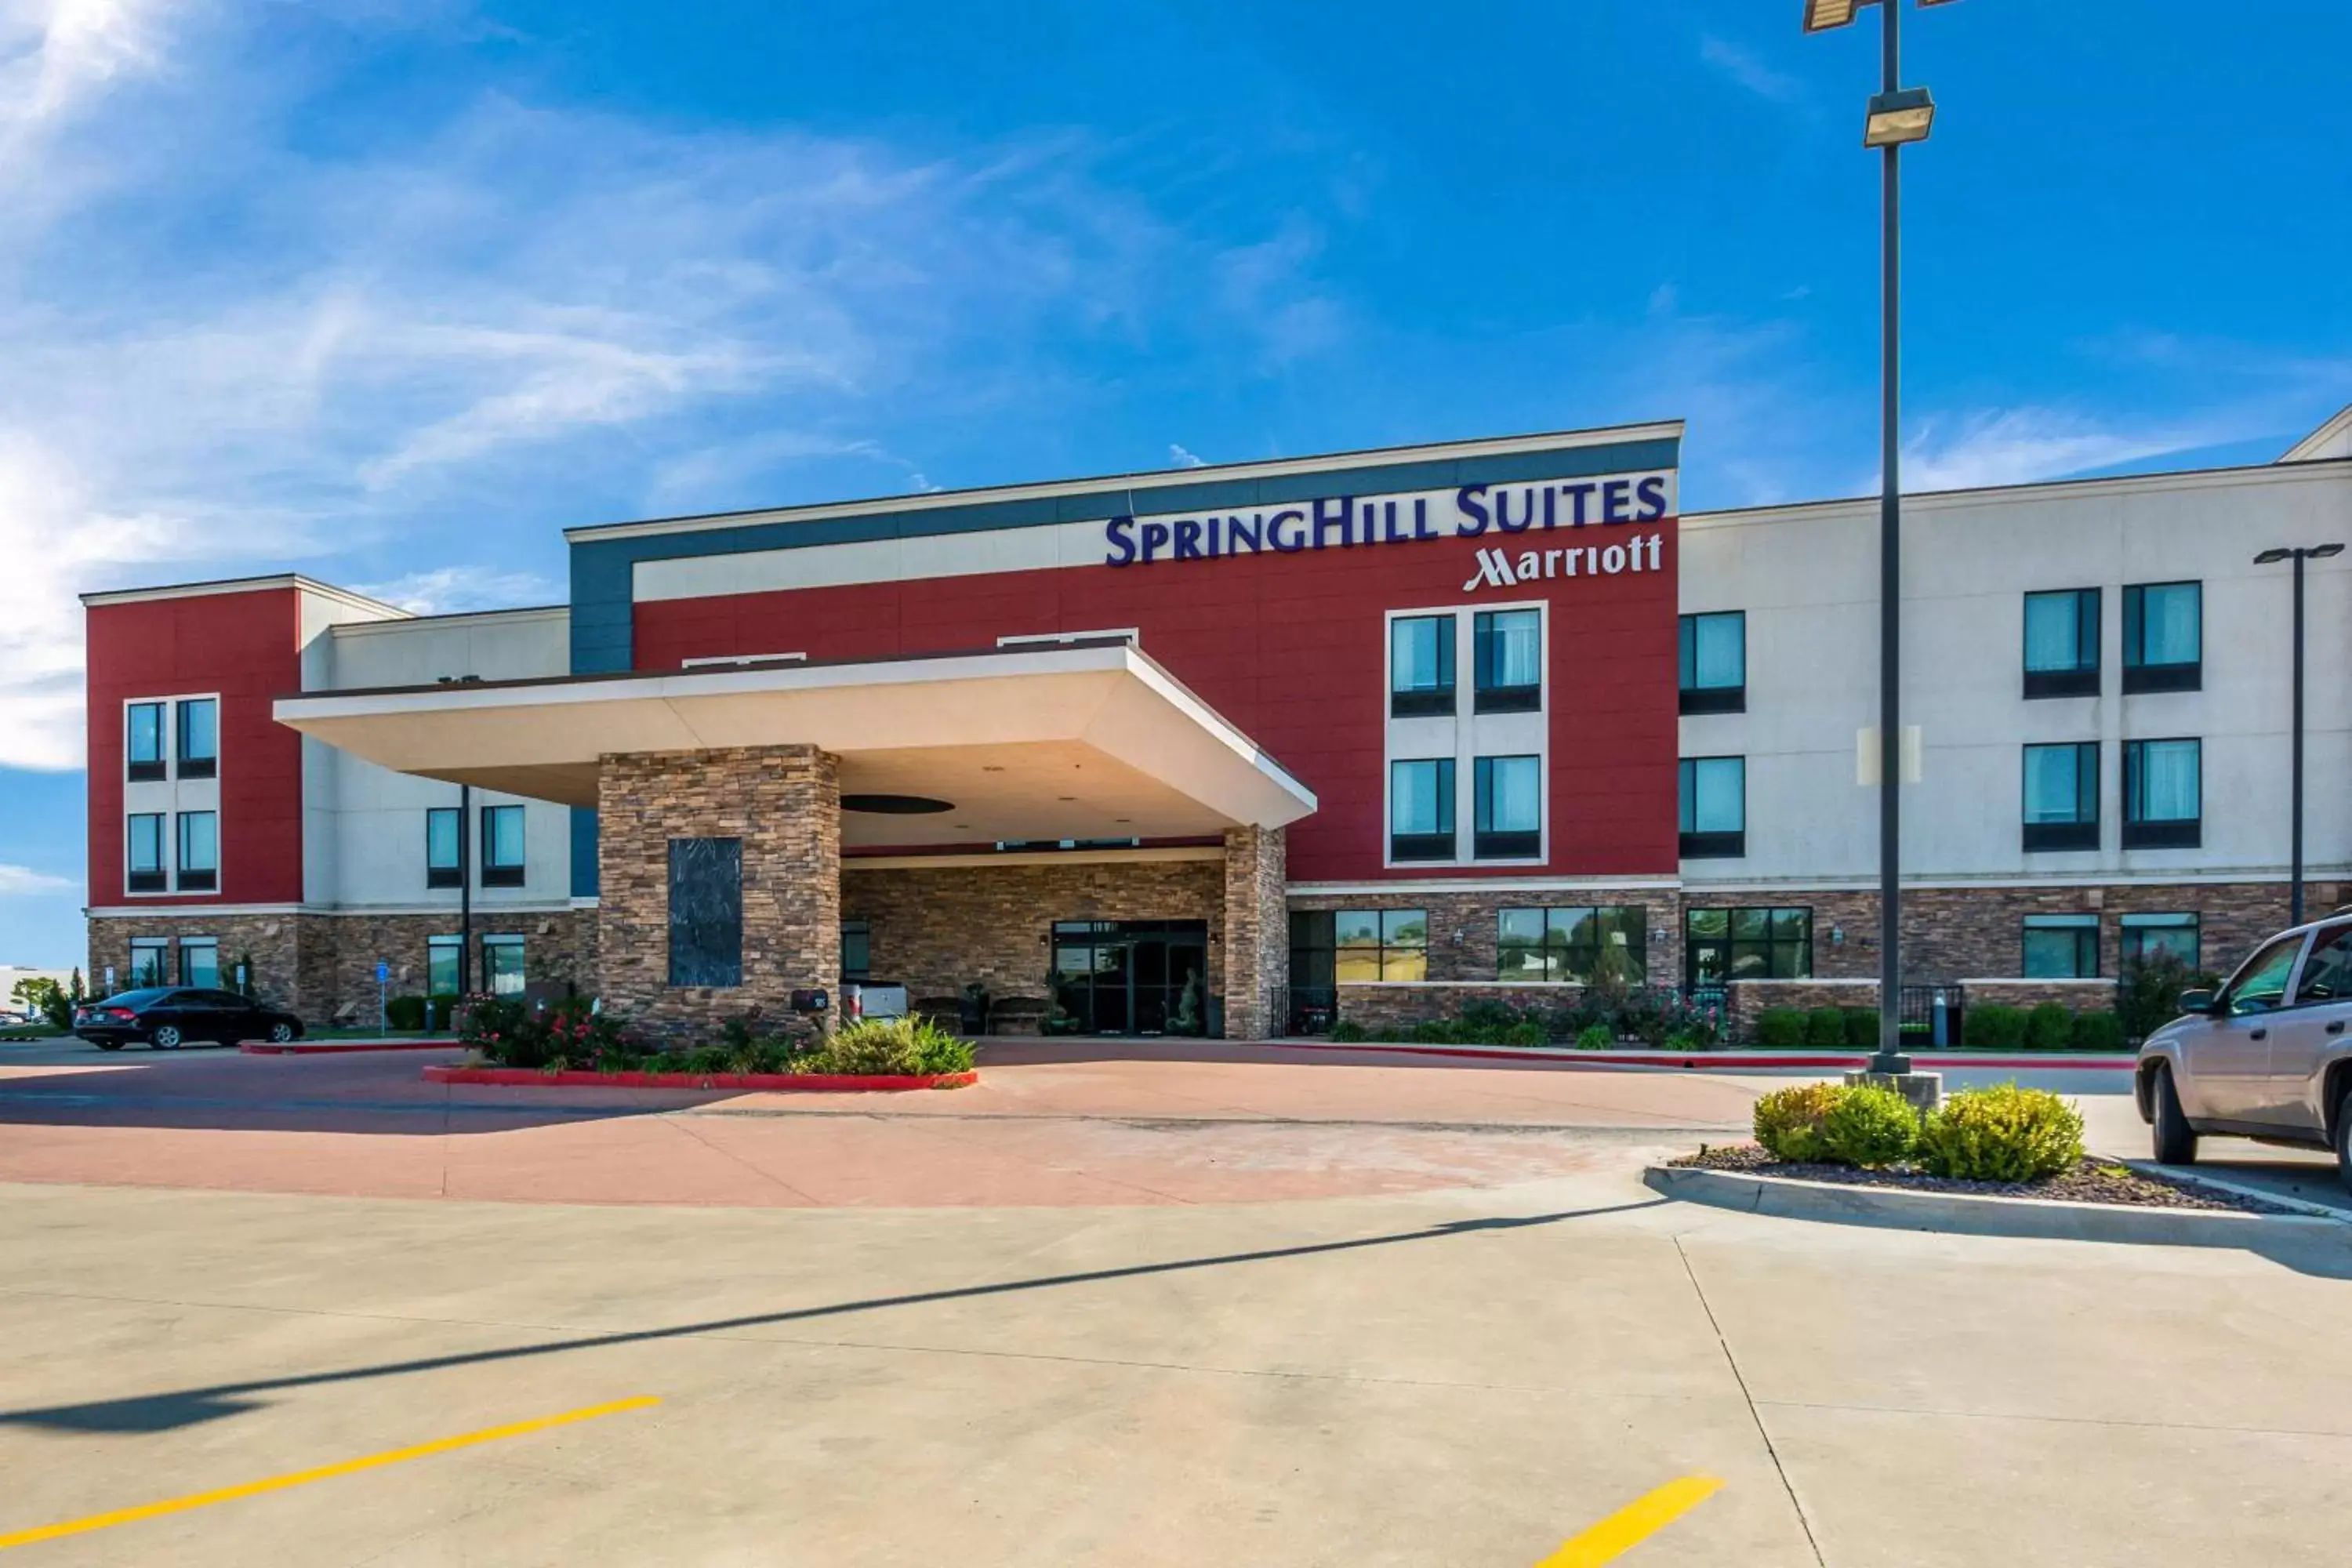 Property Building in SpringHill Suites by Marriott Enid